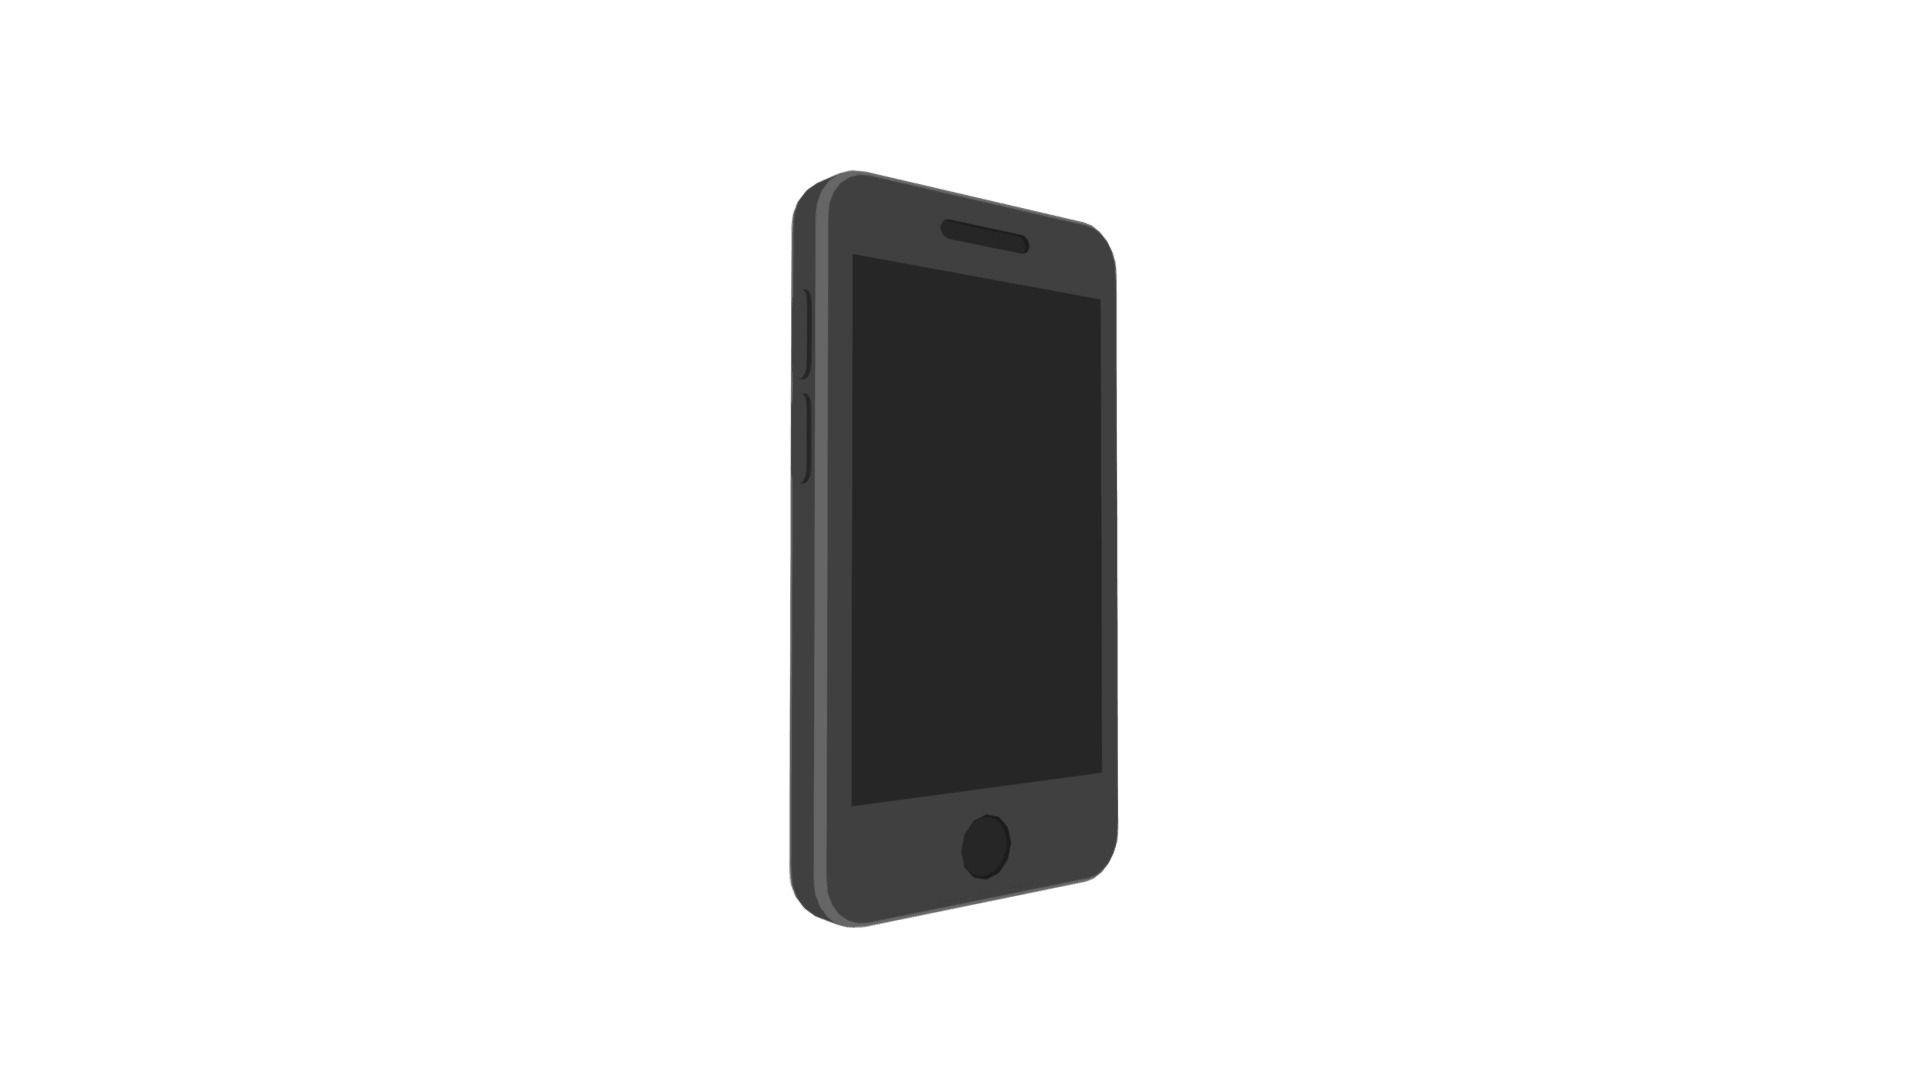 3D model Mobile Phone Low Poly Flat Icon Style - This is a 3D model of the Mobile Phone Low Poly Flat Icon Style. The 3D model is about a black cell phone.